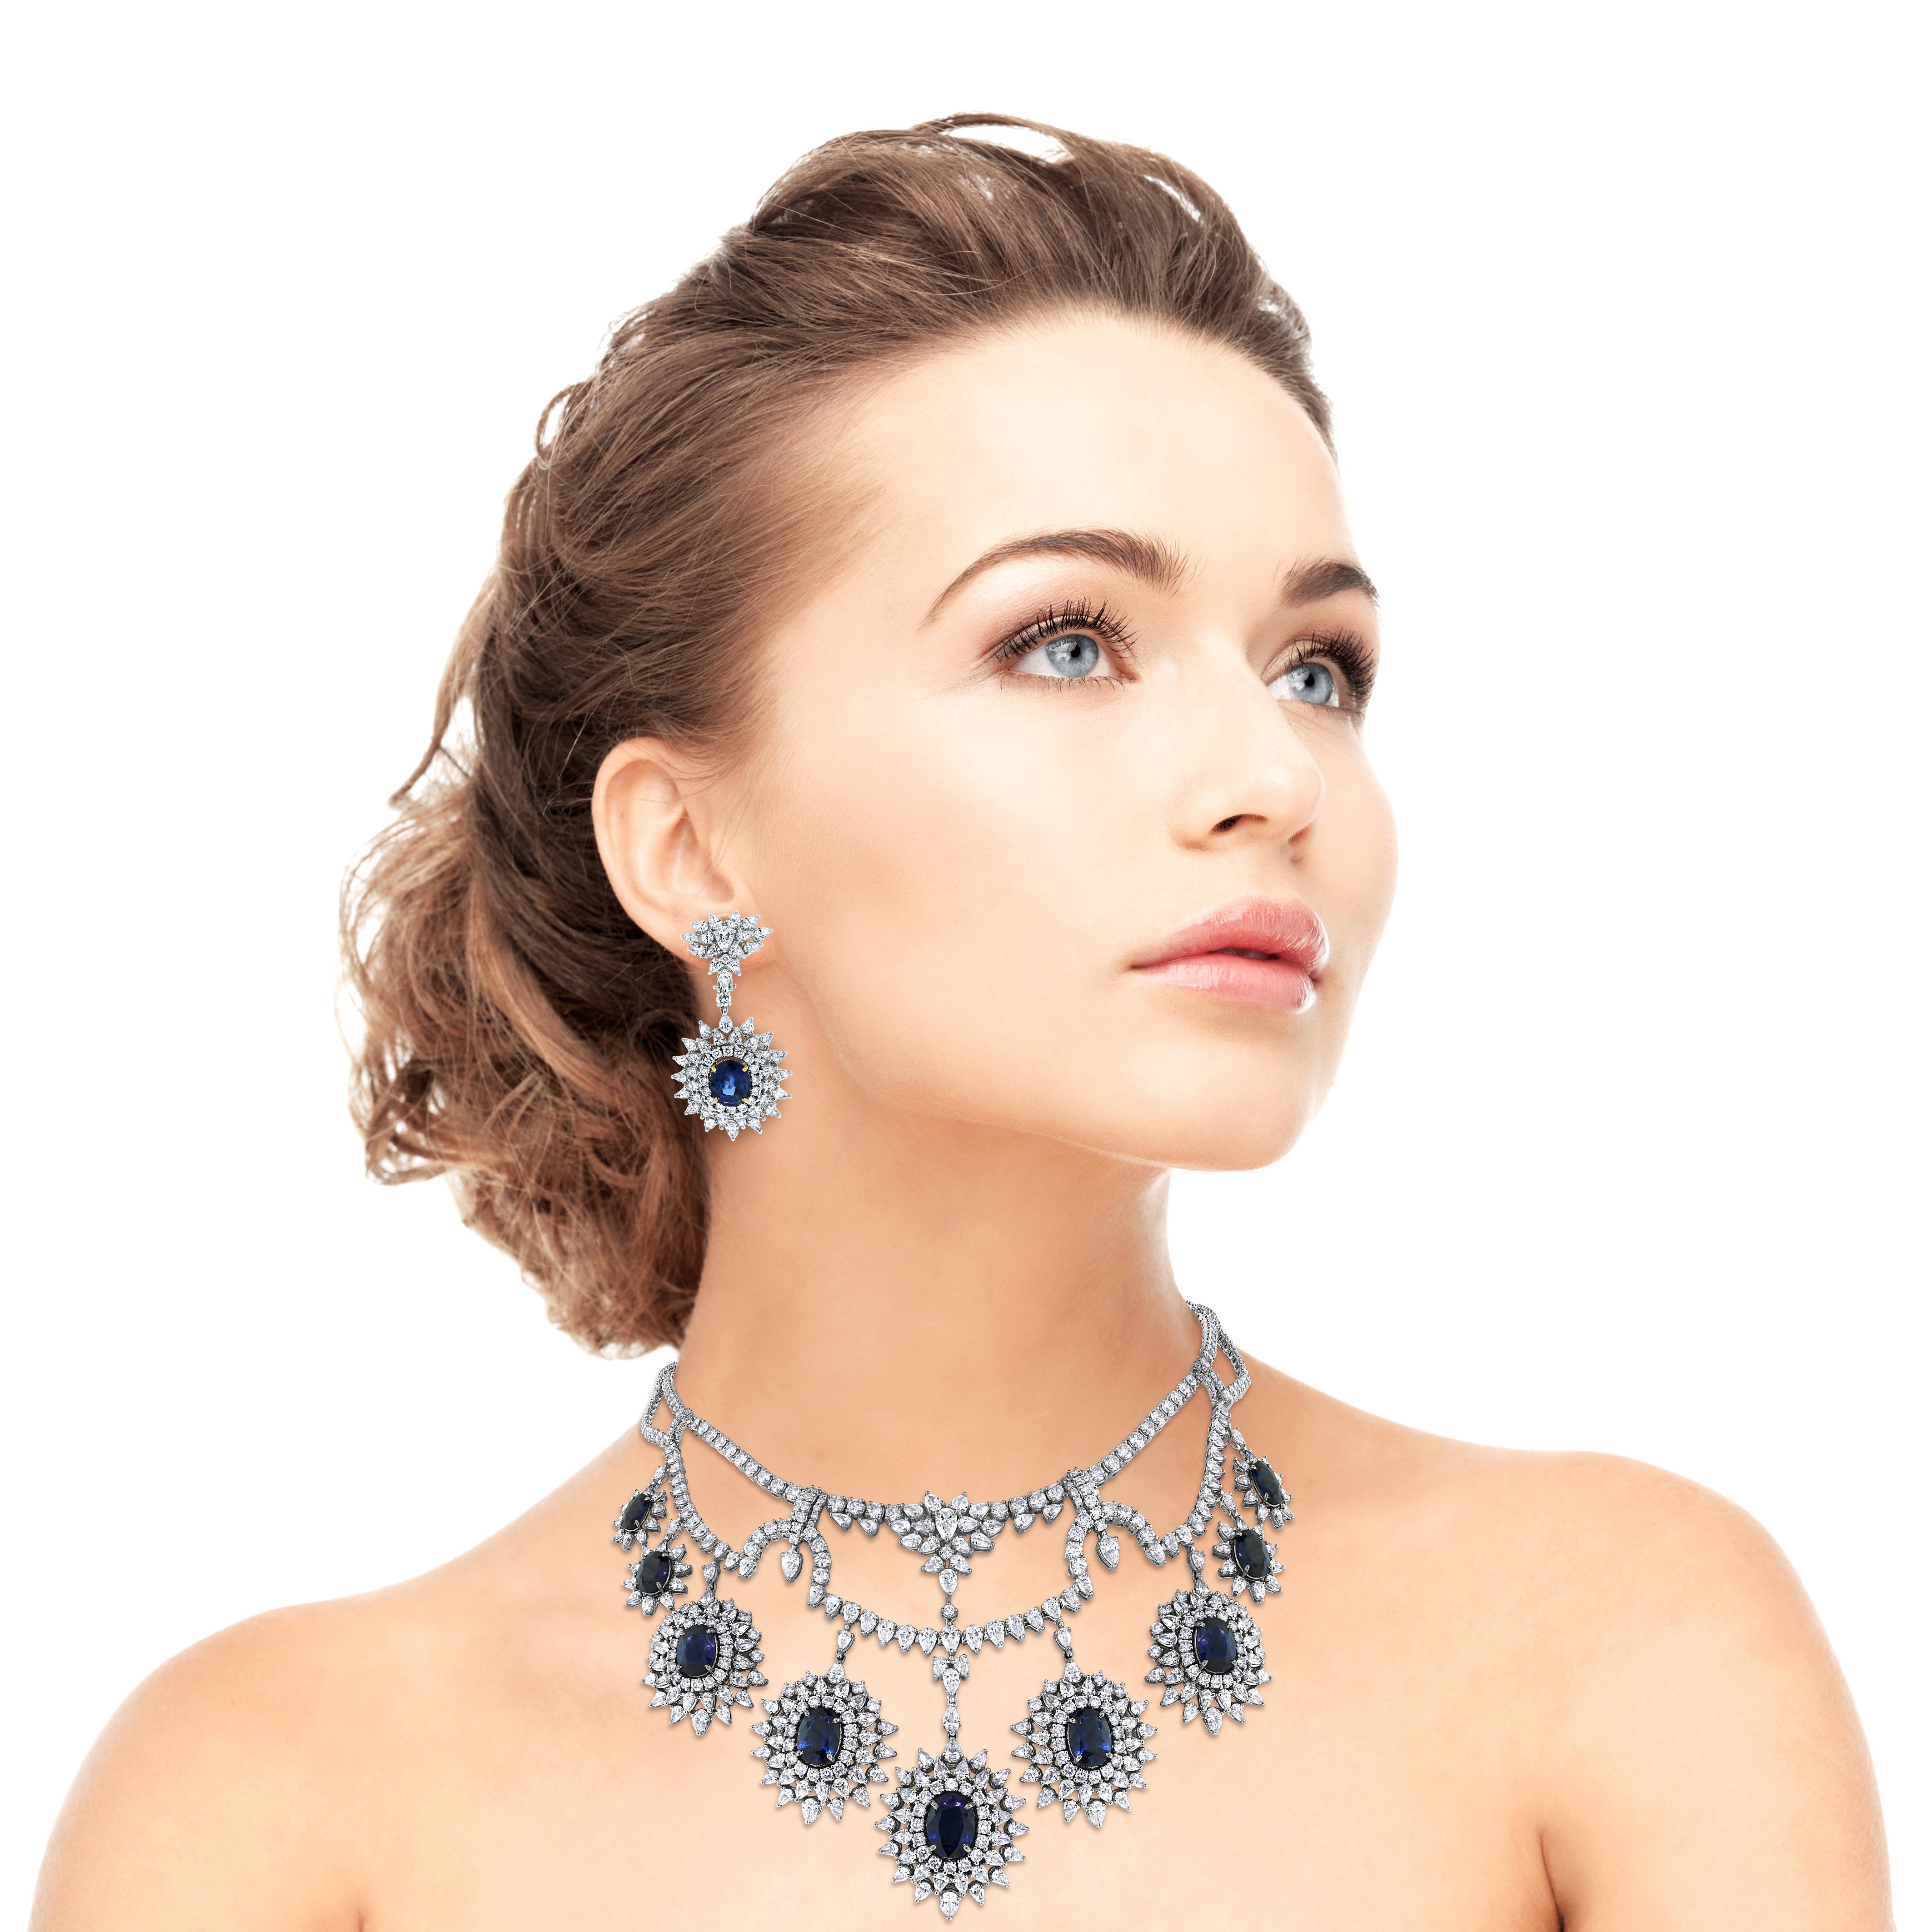 Grand and vivacious, the Atlantis suite has profound allure. Structured like a monument, the necklace sits around the neck with poise and eloquence. The watery color of the sapphires is enchanting and draws one into their luminous depths.

Gemstones